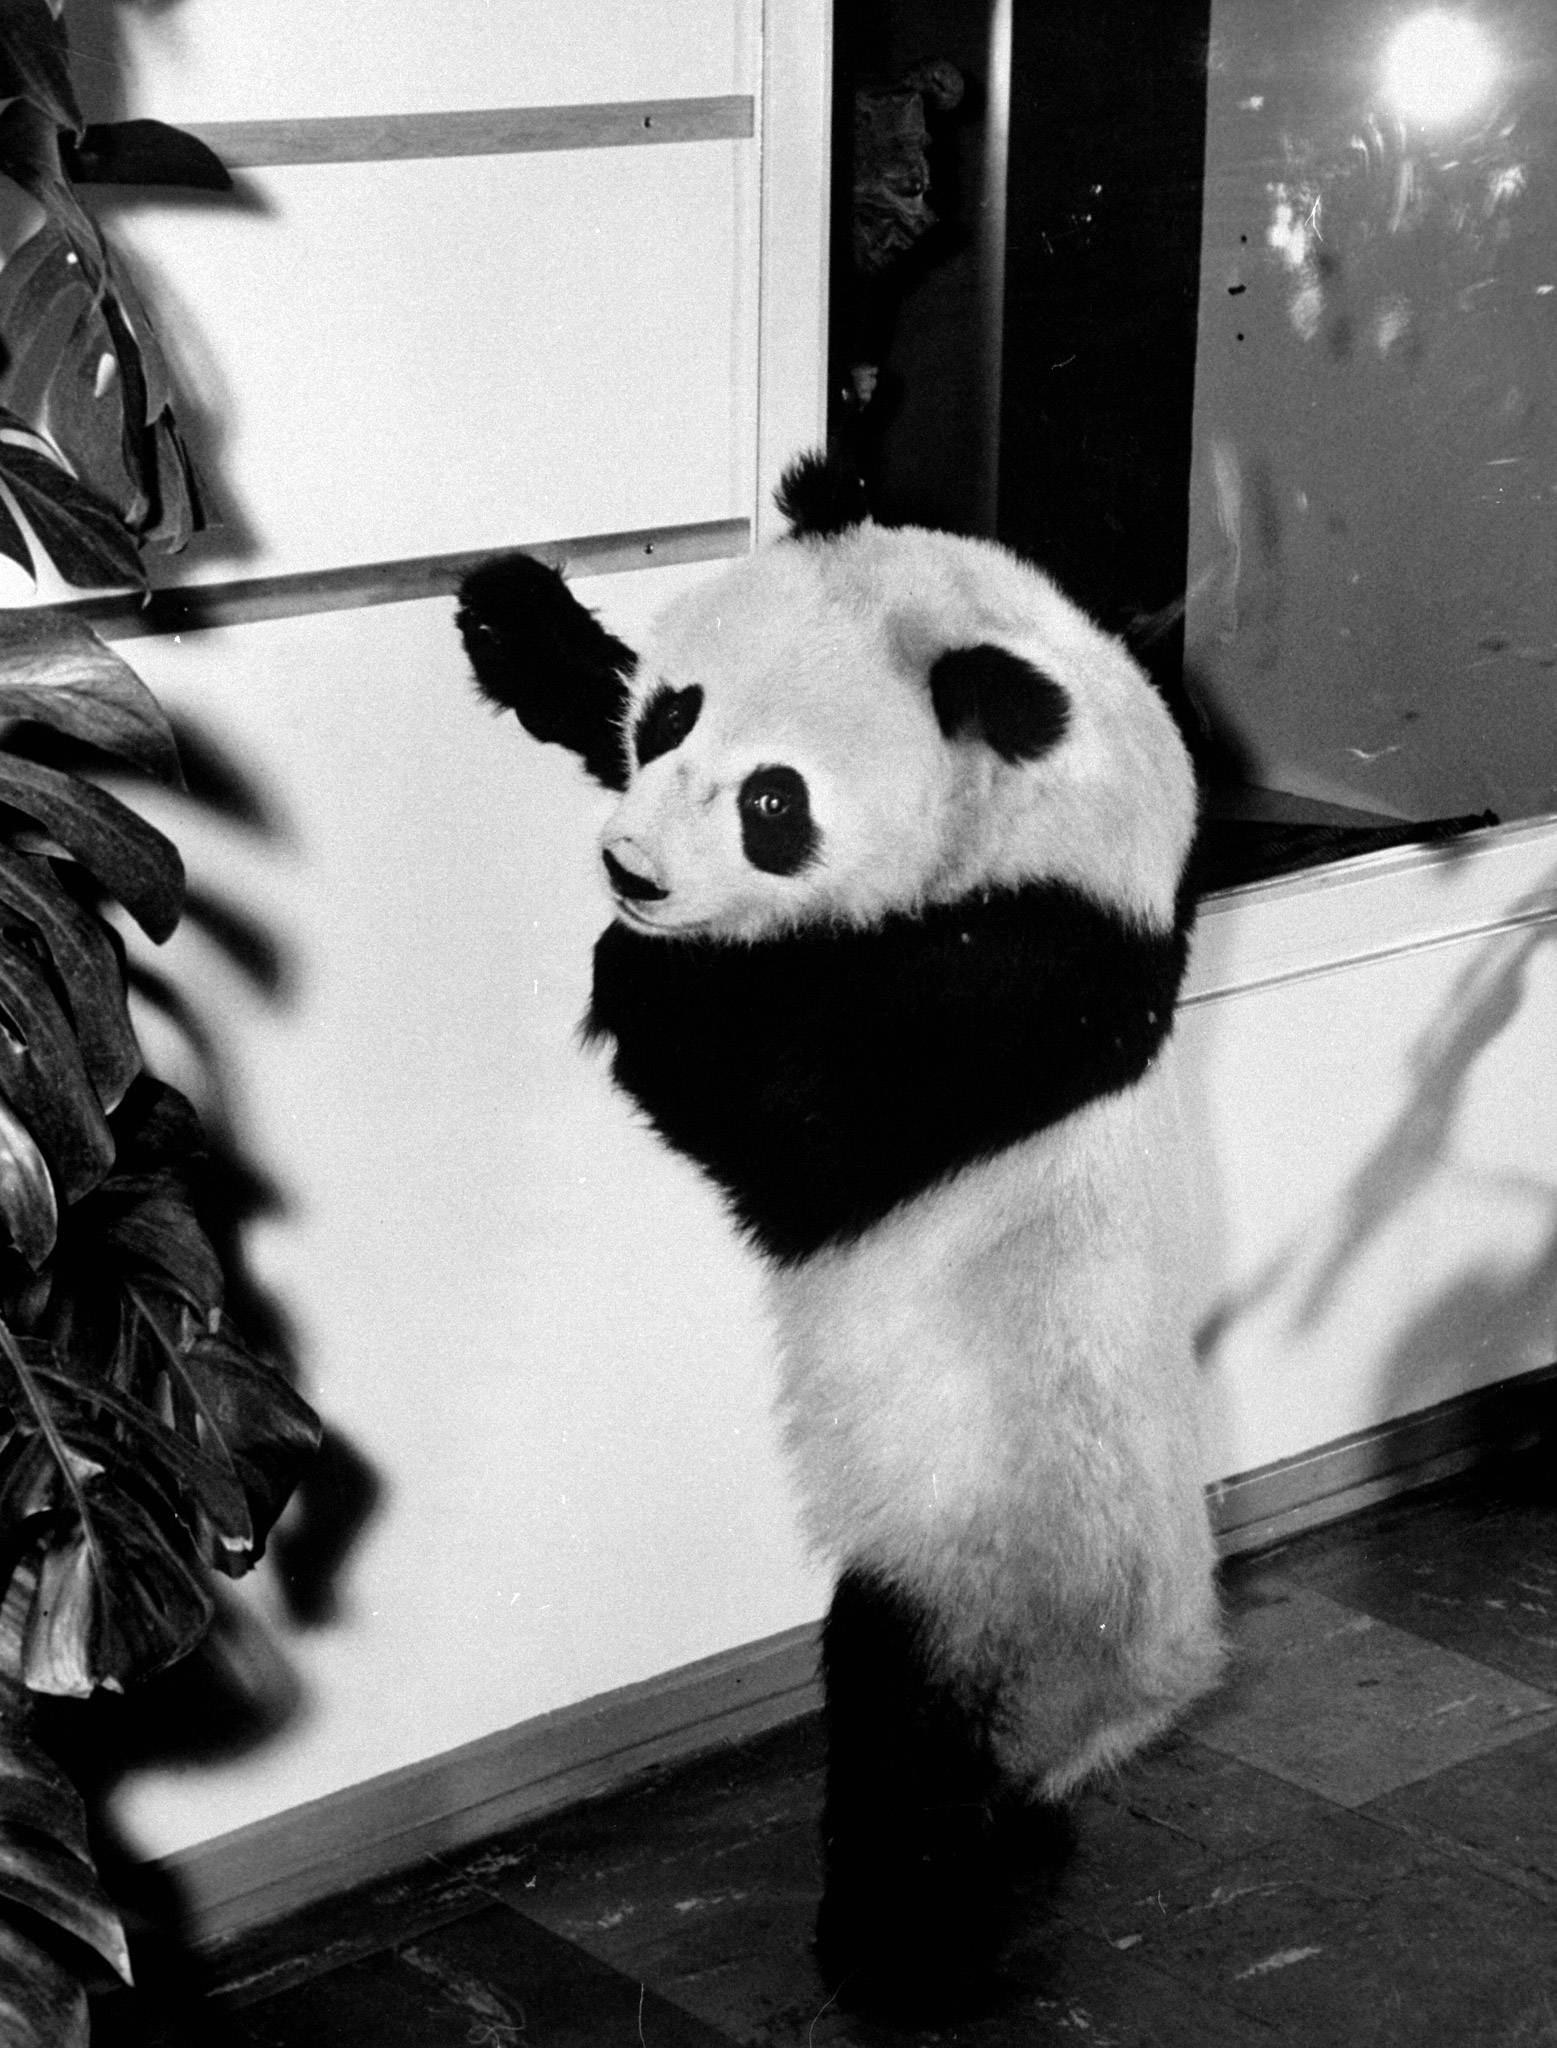 Giant Panda Chi Chi from China in 1958